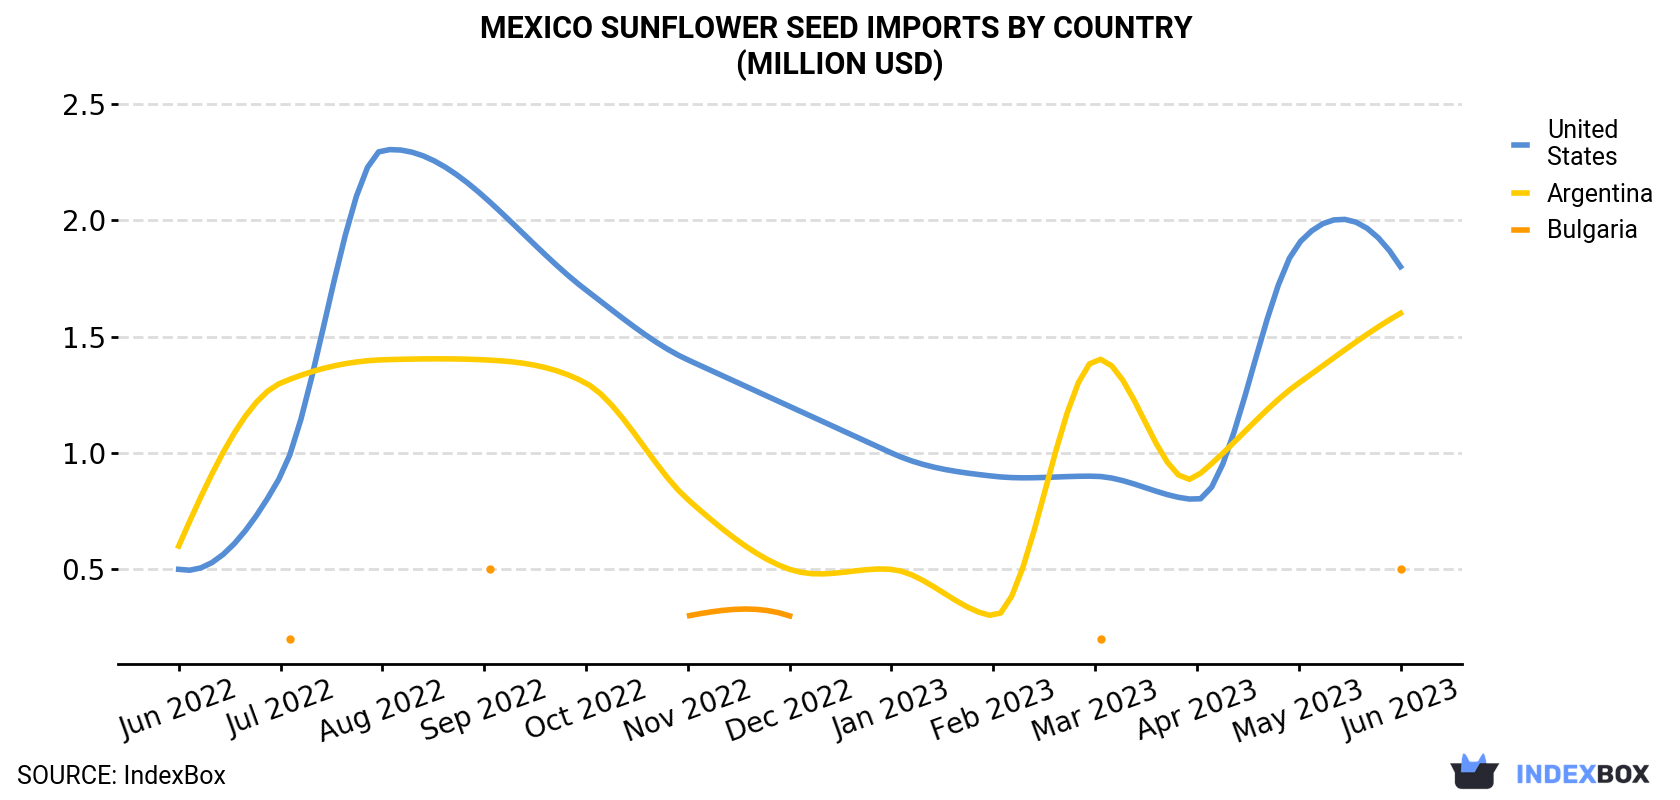 Mexico Sunflower Seed Imports By Country (Million USD)